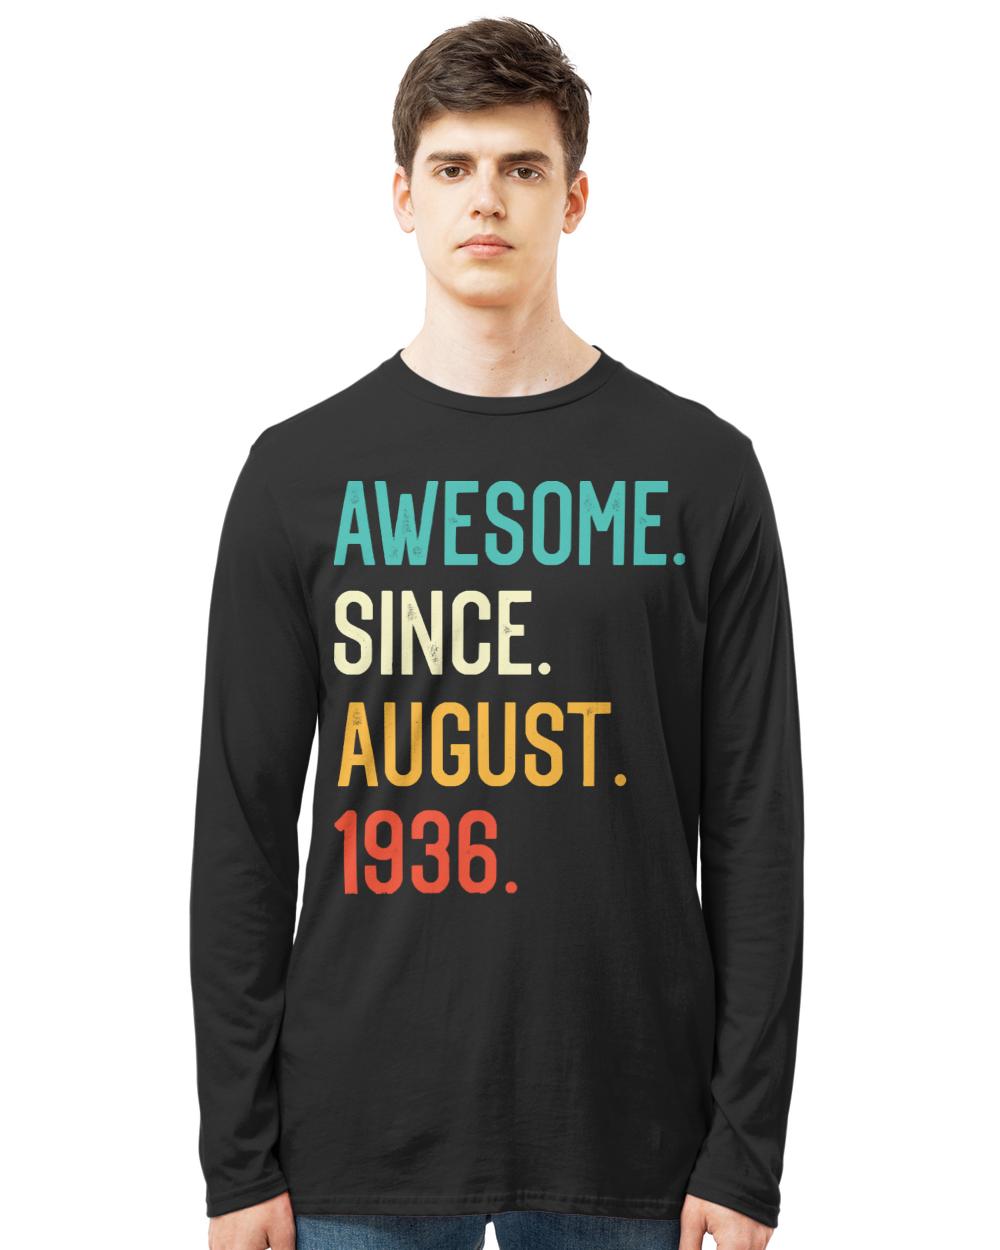 Awesome Since 1936 T- Shirt Awesome Since August 1936 T- Shirt